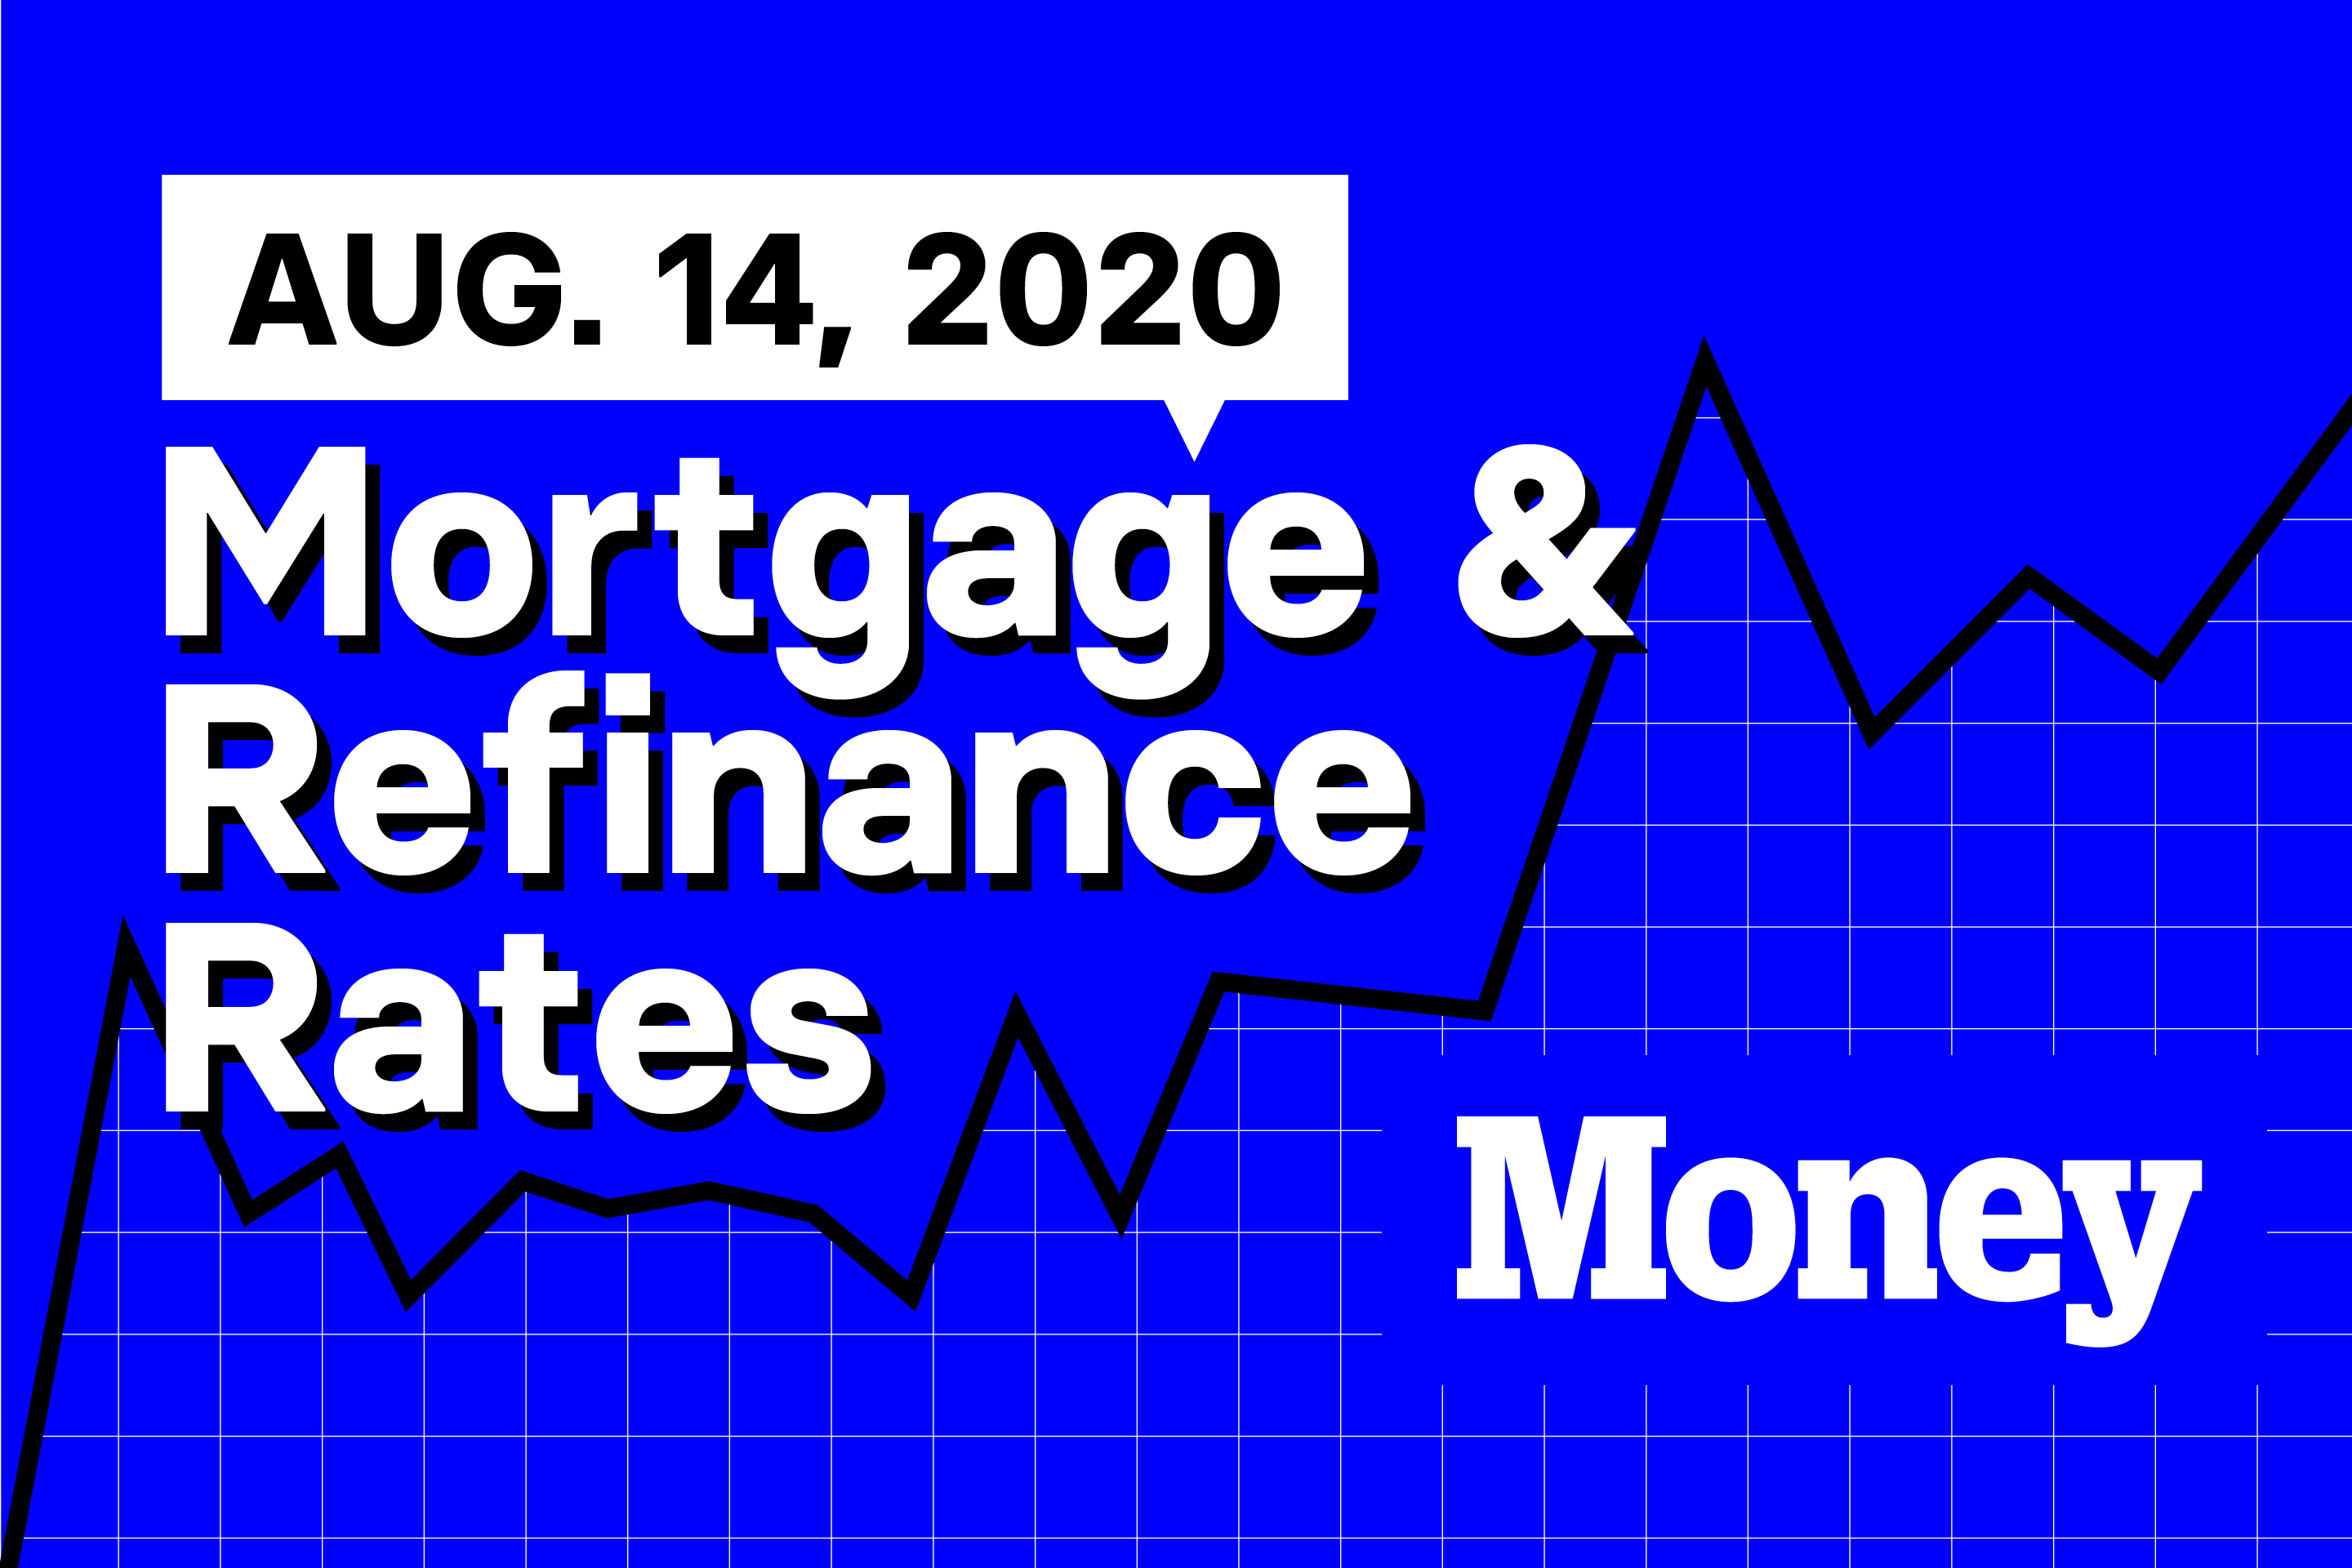 Here Are Today's Best Mortgage & Refinance Rates for August 14, 2020